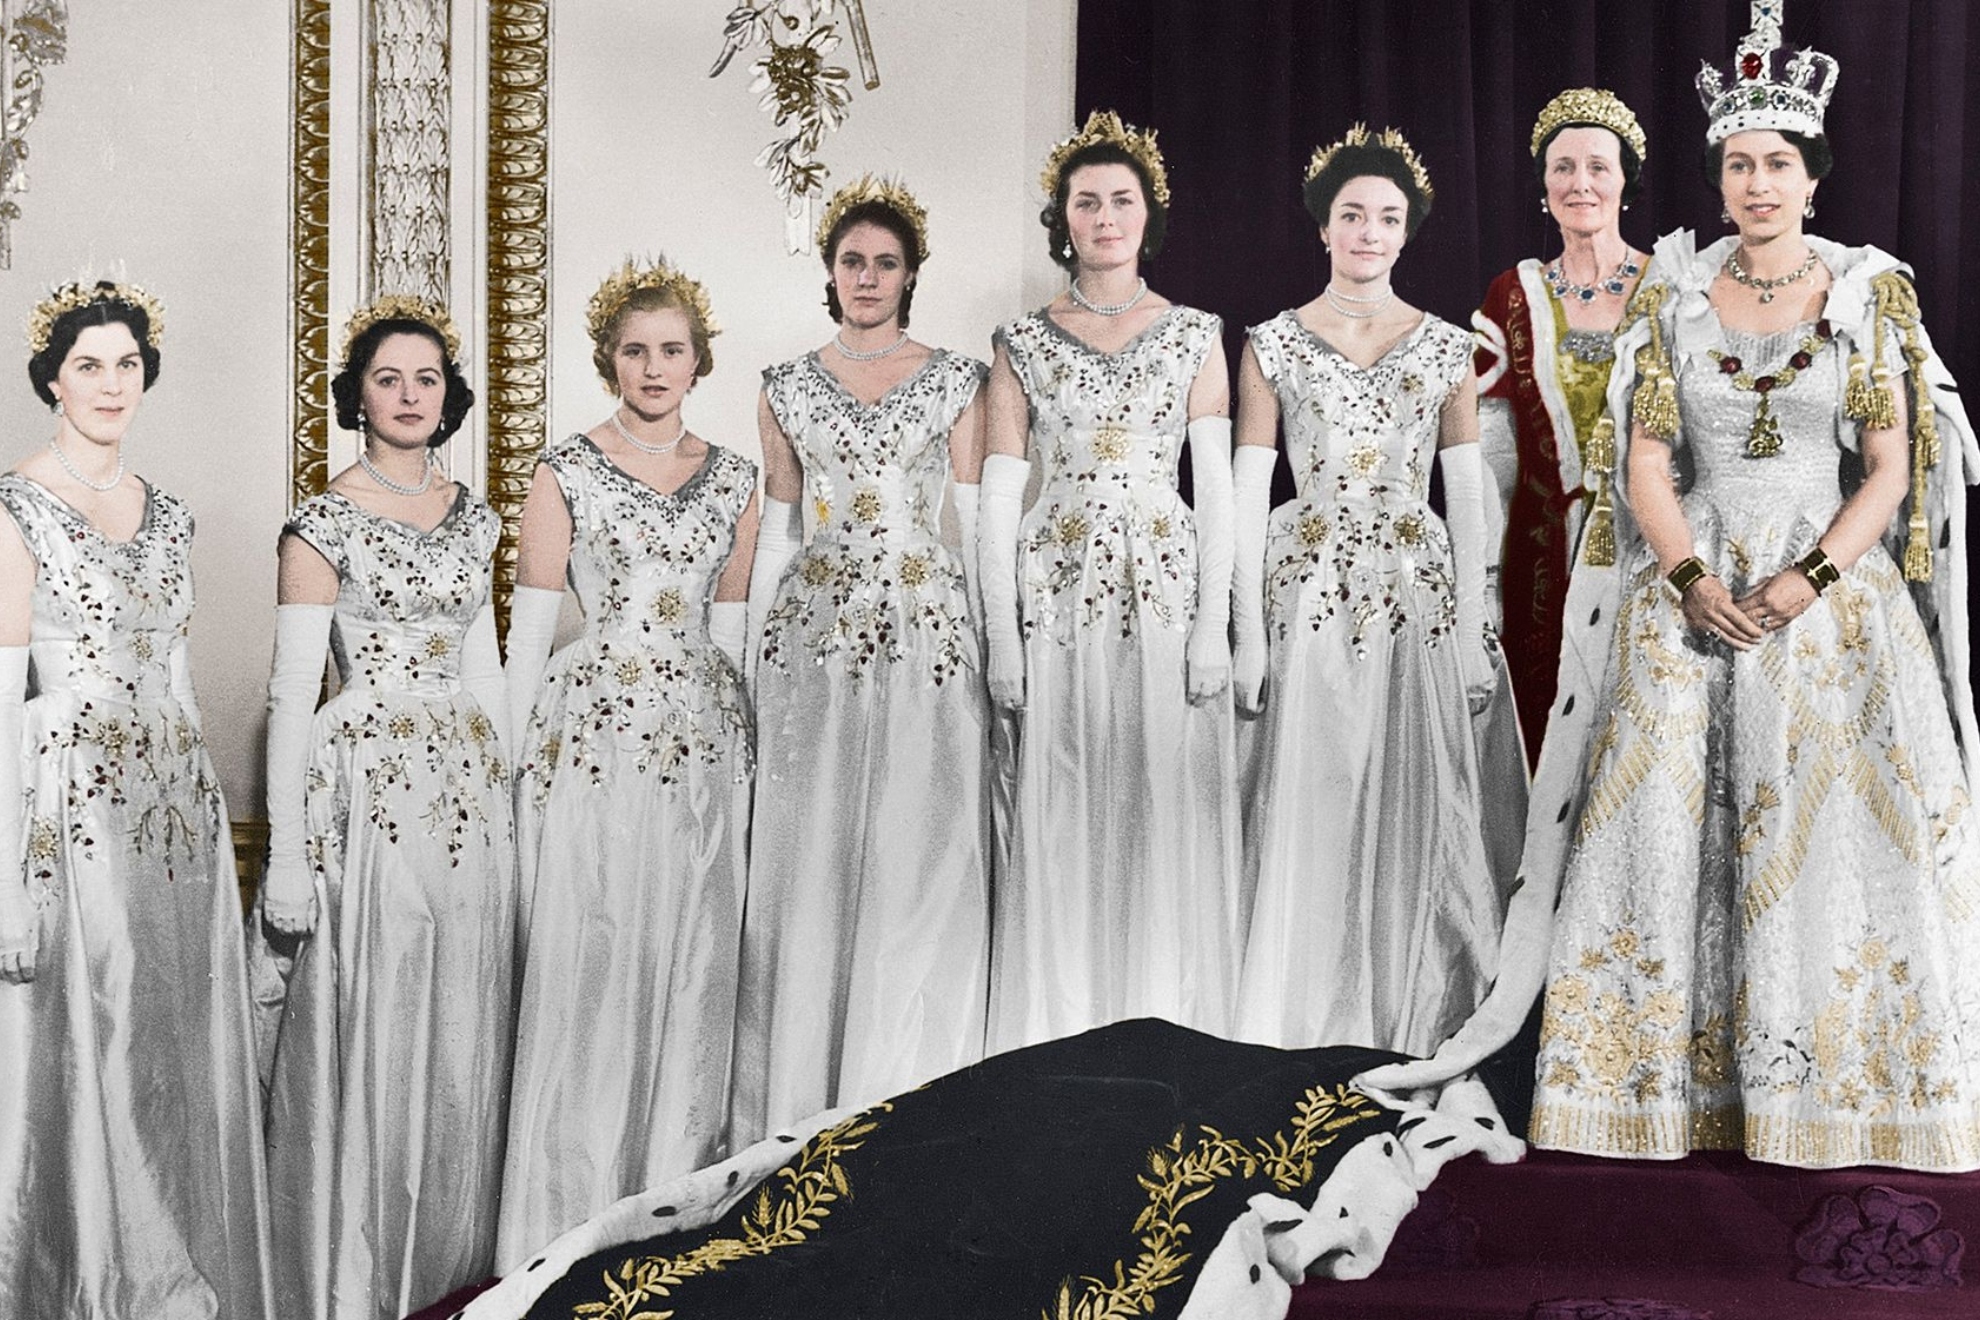 Queen Elizabeth and her maids of honor at her coronation